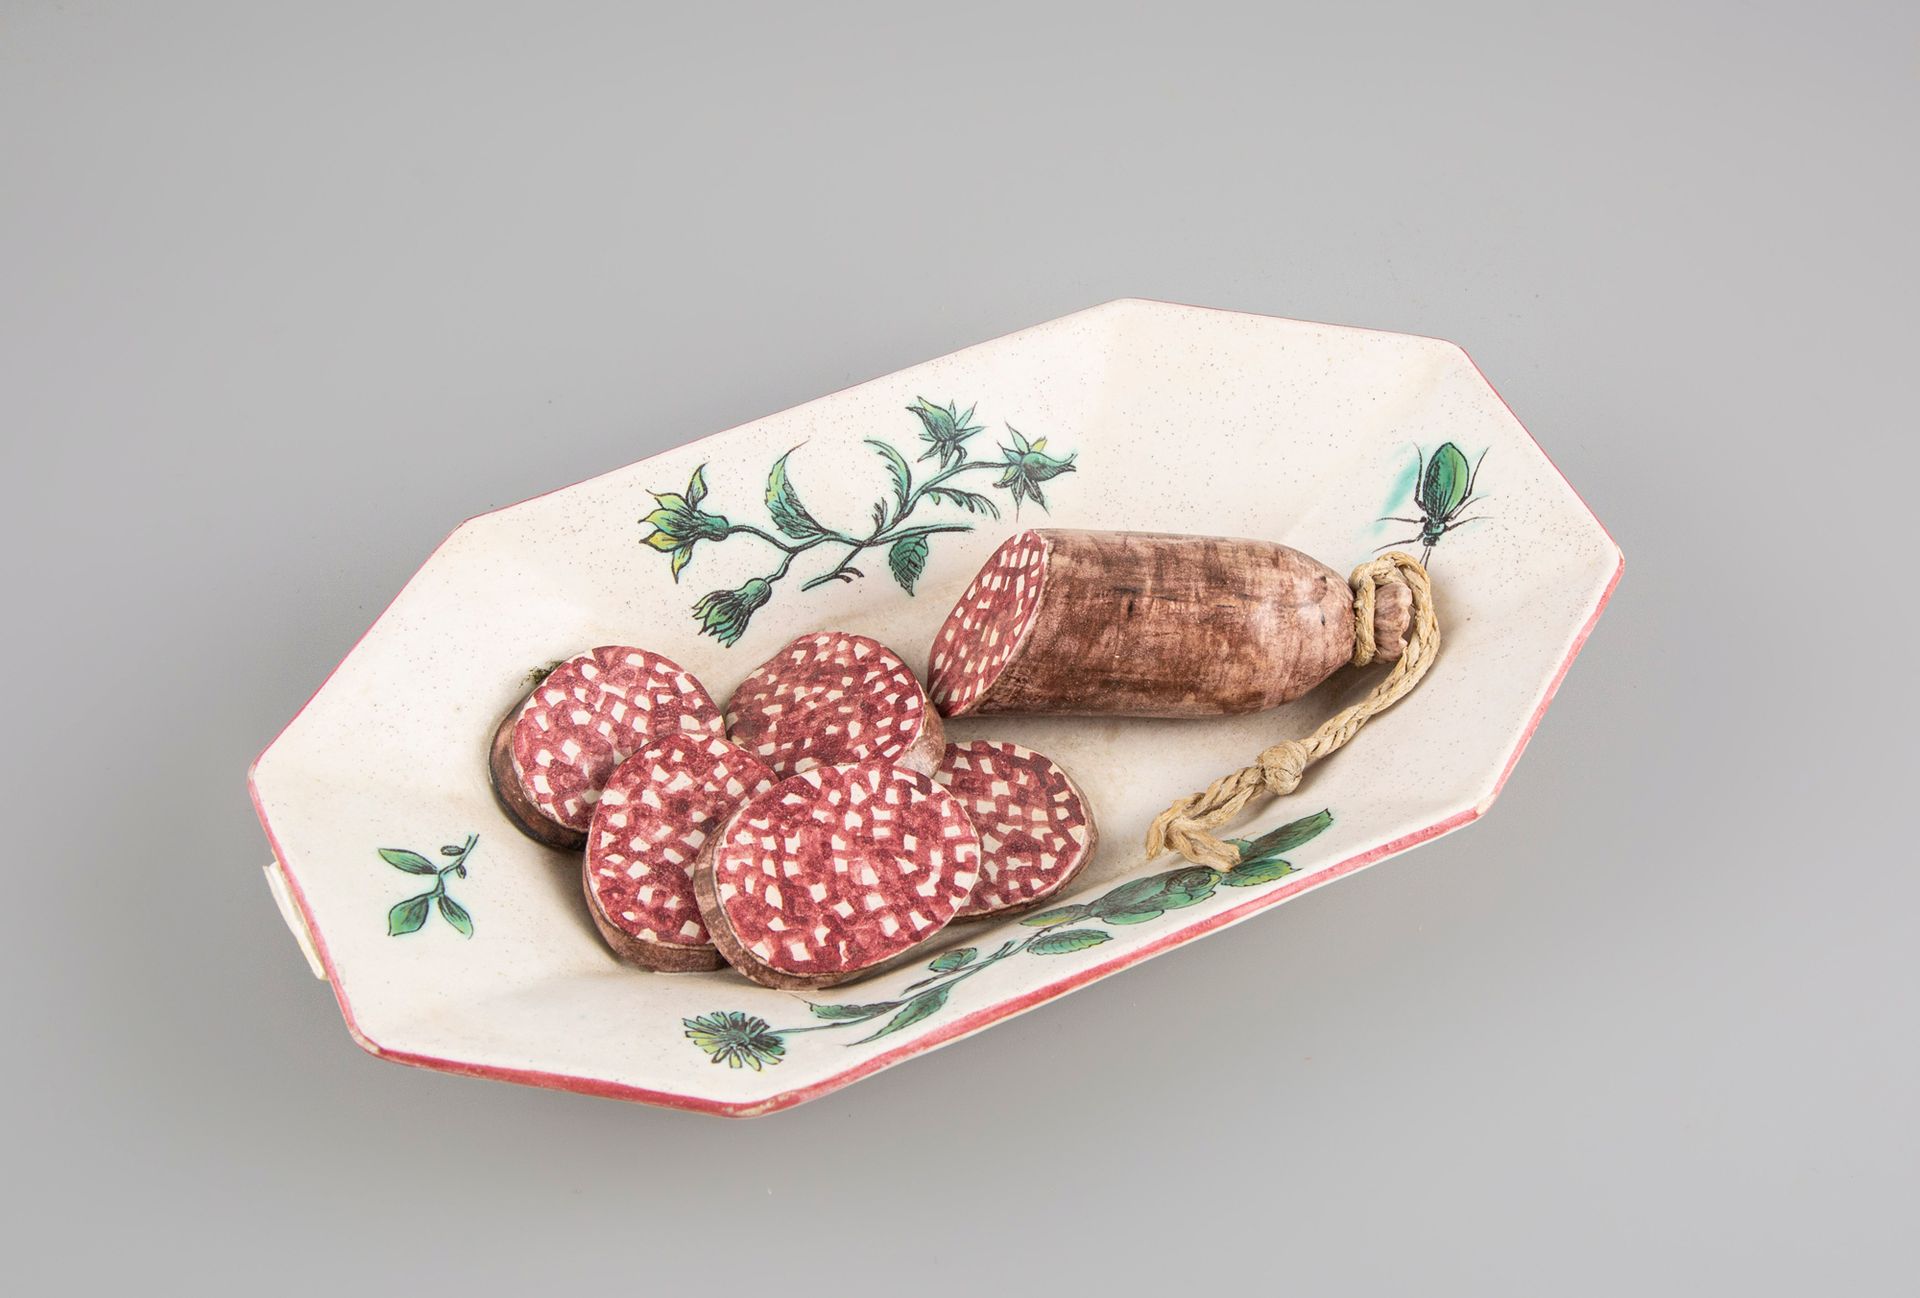 Null 
Decorative pickle, Garlic sausage

Earthenware. Rectangular shape with cut&hellip;